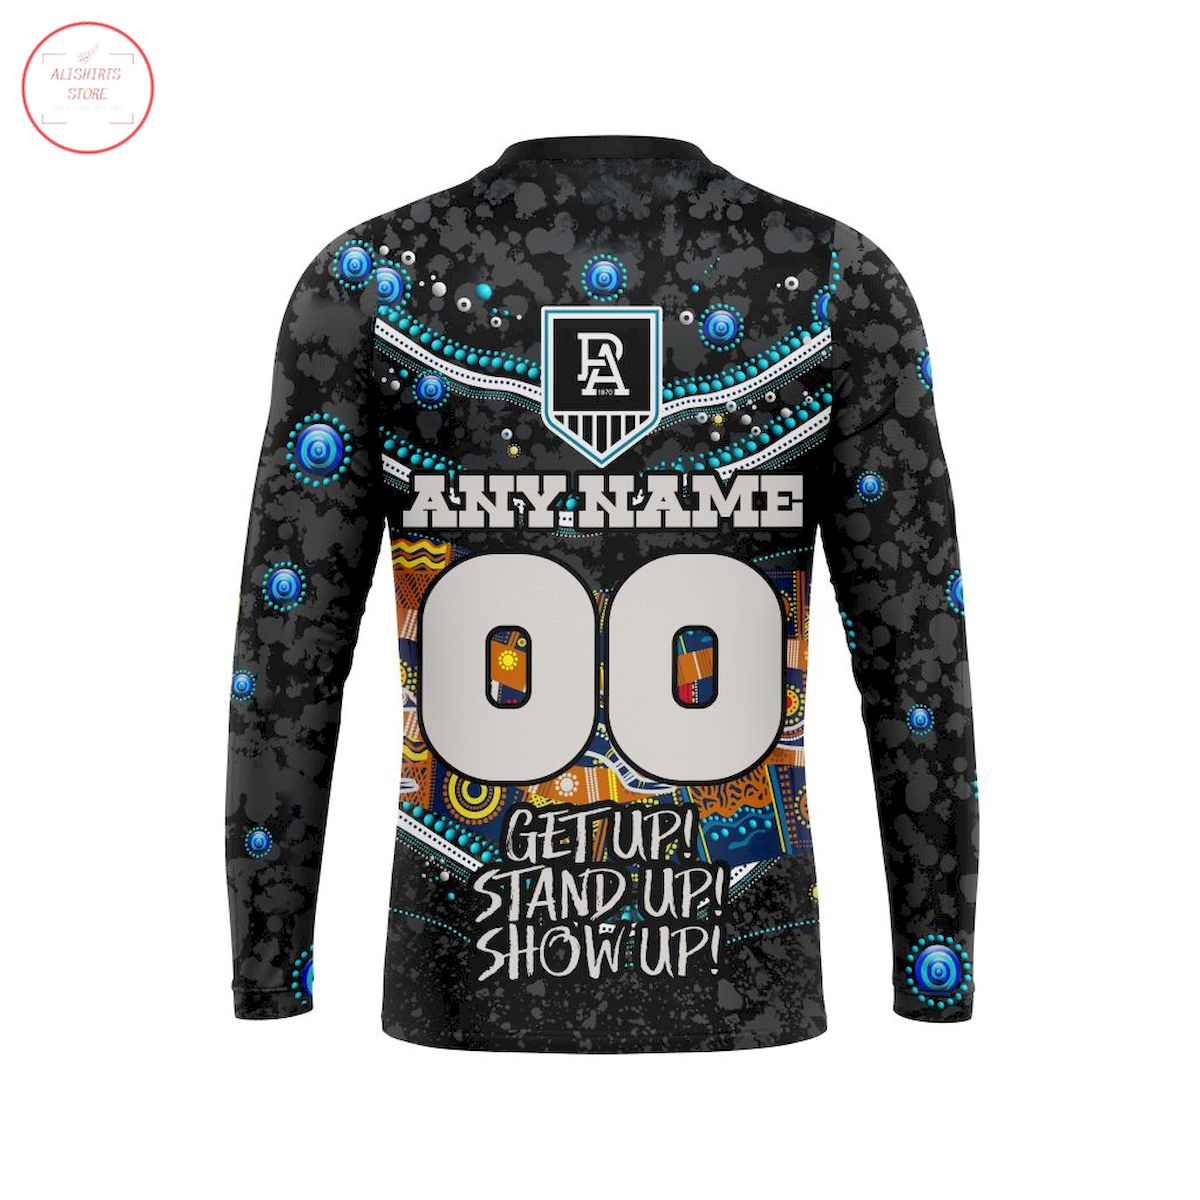 AFL Port Adelaide Football Club Customized All Over Printed Shirts